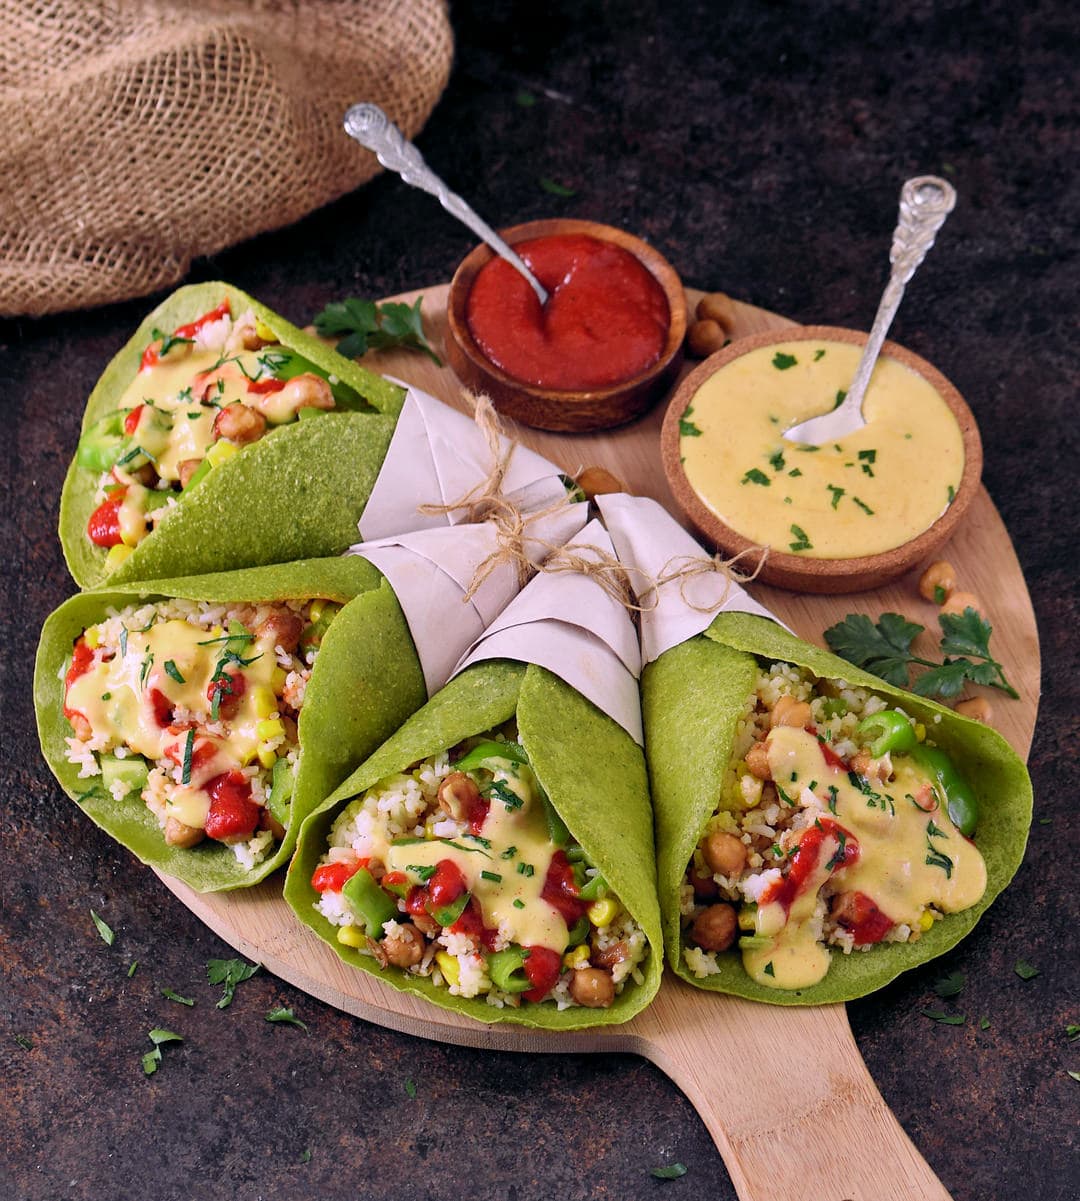 Homemade green spinach tortillas with 3 ingredients. The recipe is healthy, gluten-free, vegan, wheat-free, corn-free, great for kids, and easy to make. Perfect for wraps, tacos, burritos, enchiladas, quesadillas.